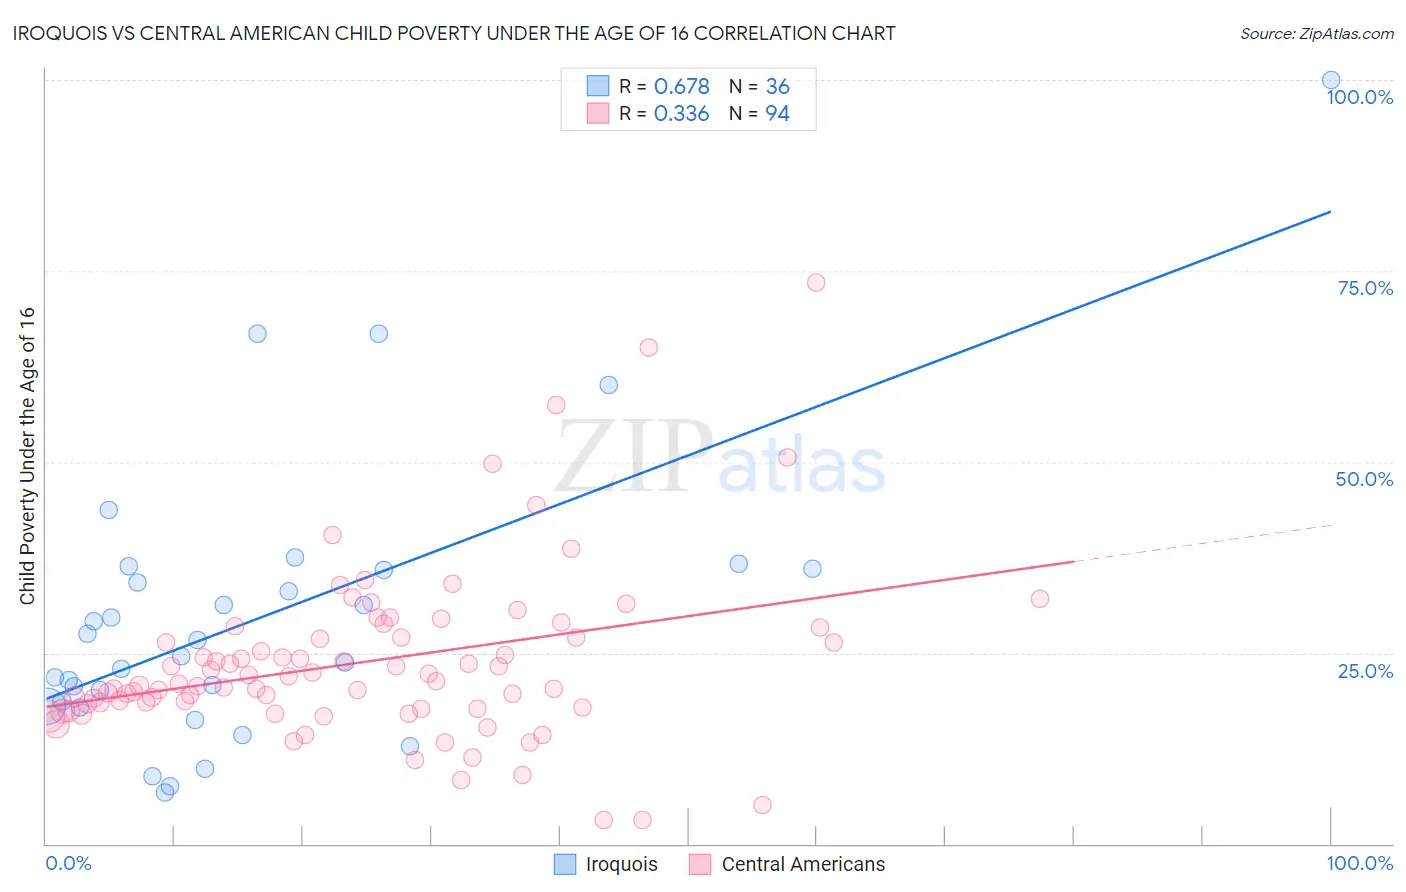 Iroquois vs Central American Child Poverty Under the Age of 16